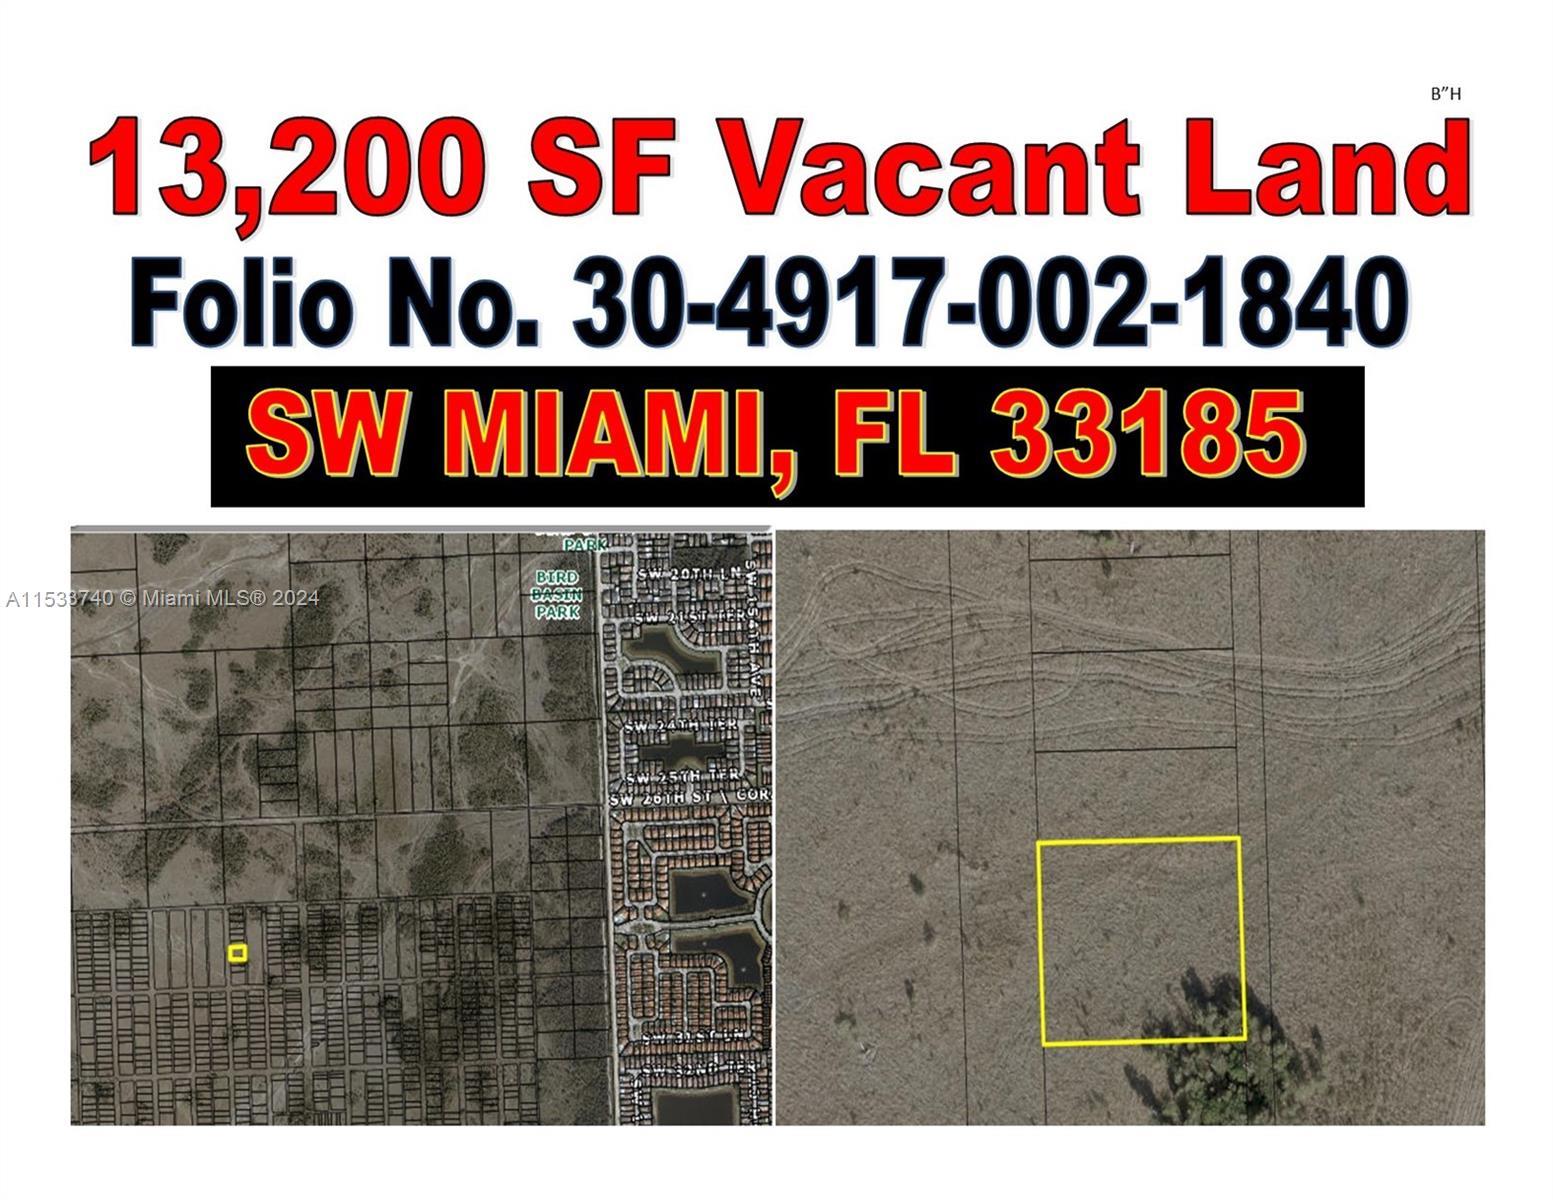 Photo of Vacant Land S Of SW 157 Ave Miami in Miami, FL